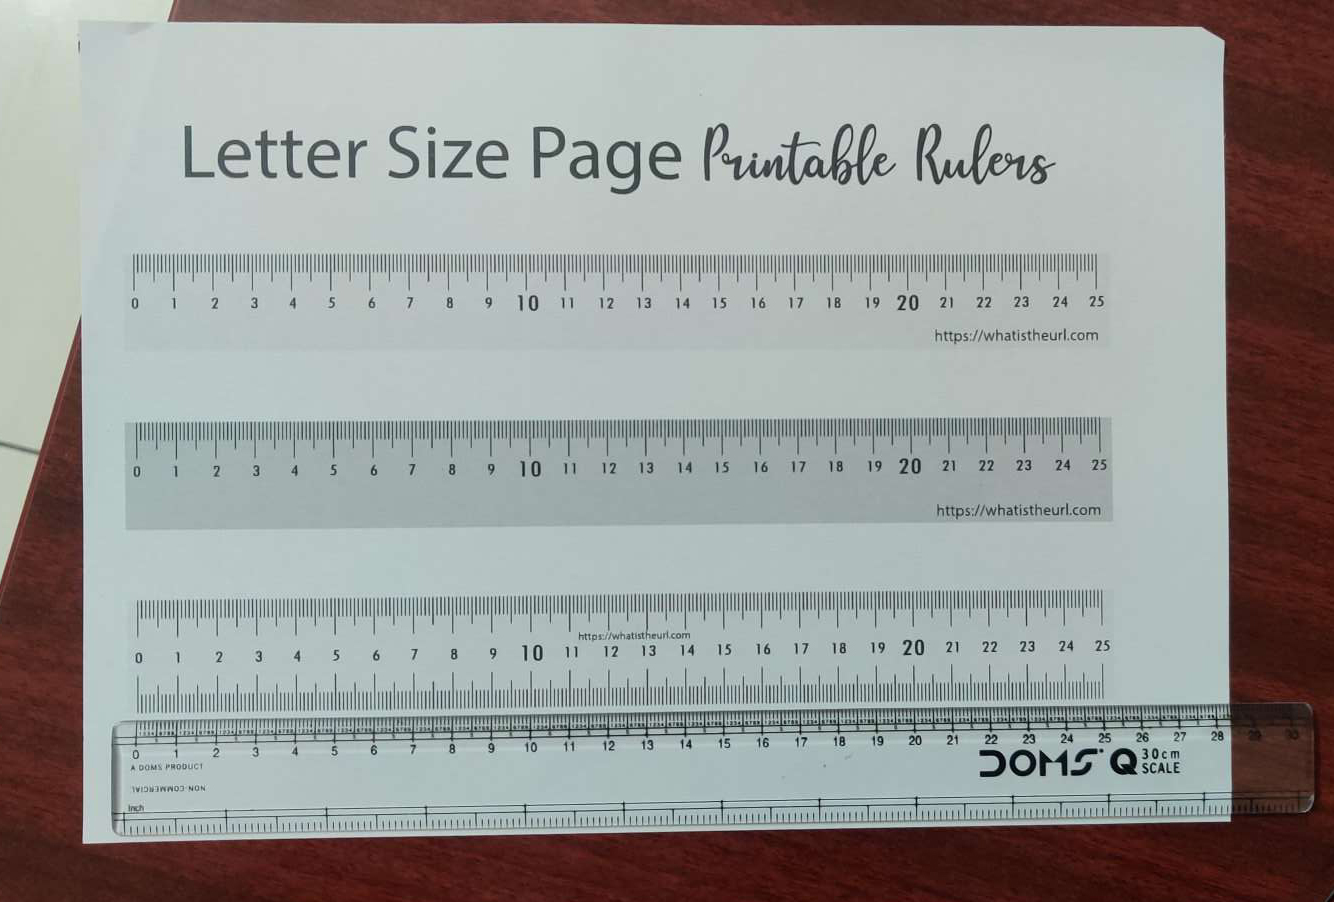 Printable Rulers for Letter and A4 Size Papers Up to 25 centimeters